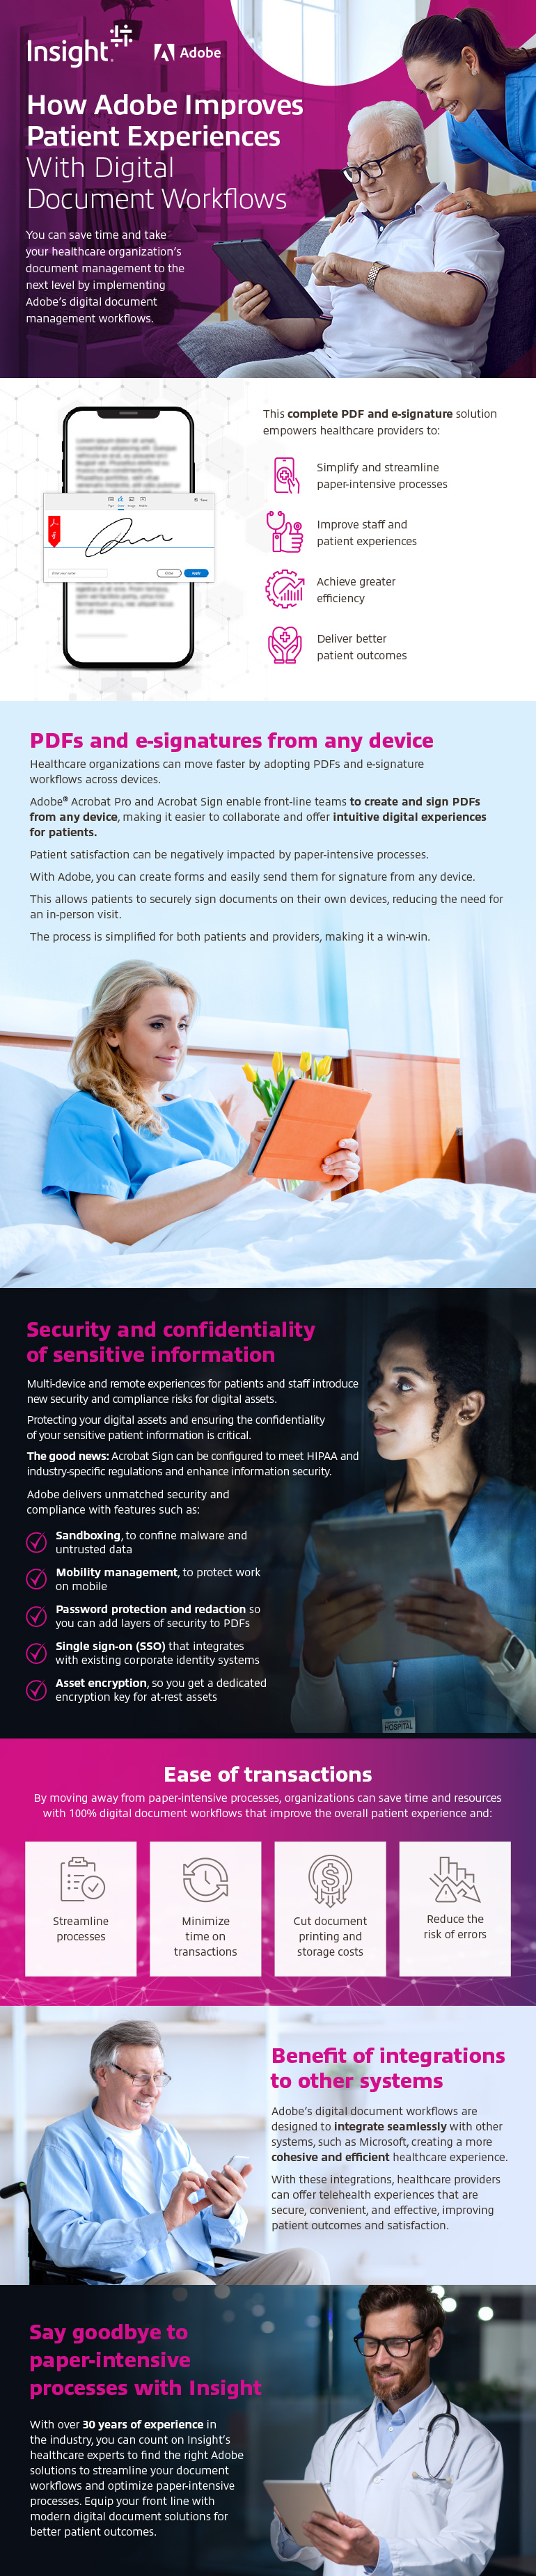 Infographic displaying How Adobe Improves Patient Experiences With Digital Document Workflows. Translated below.